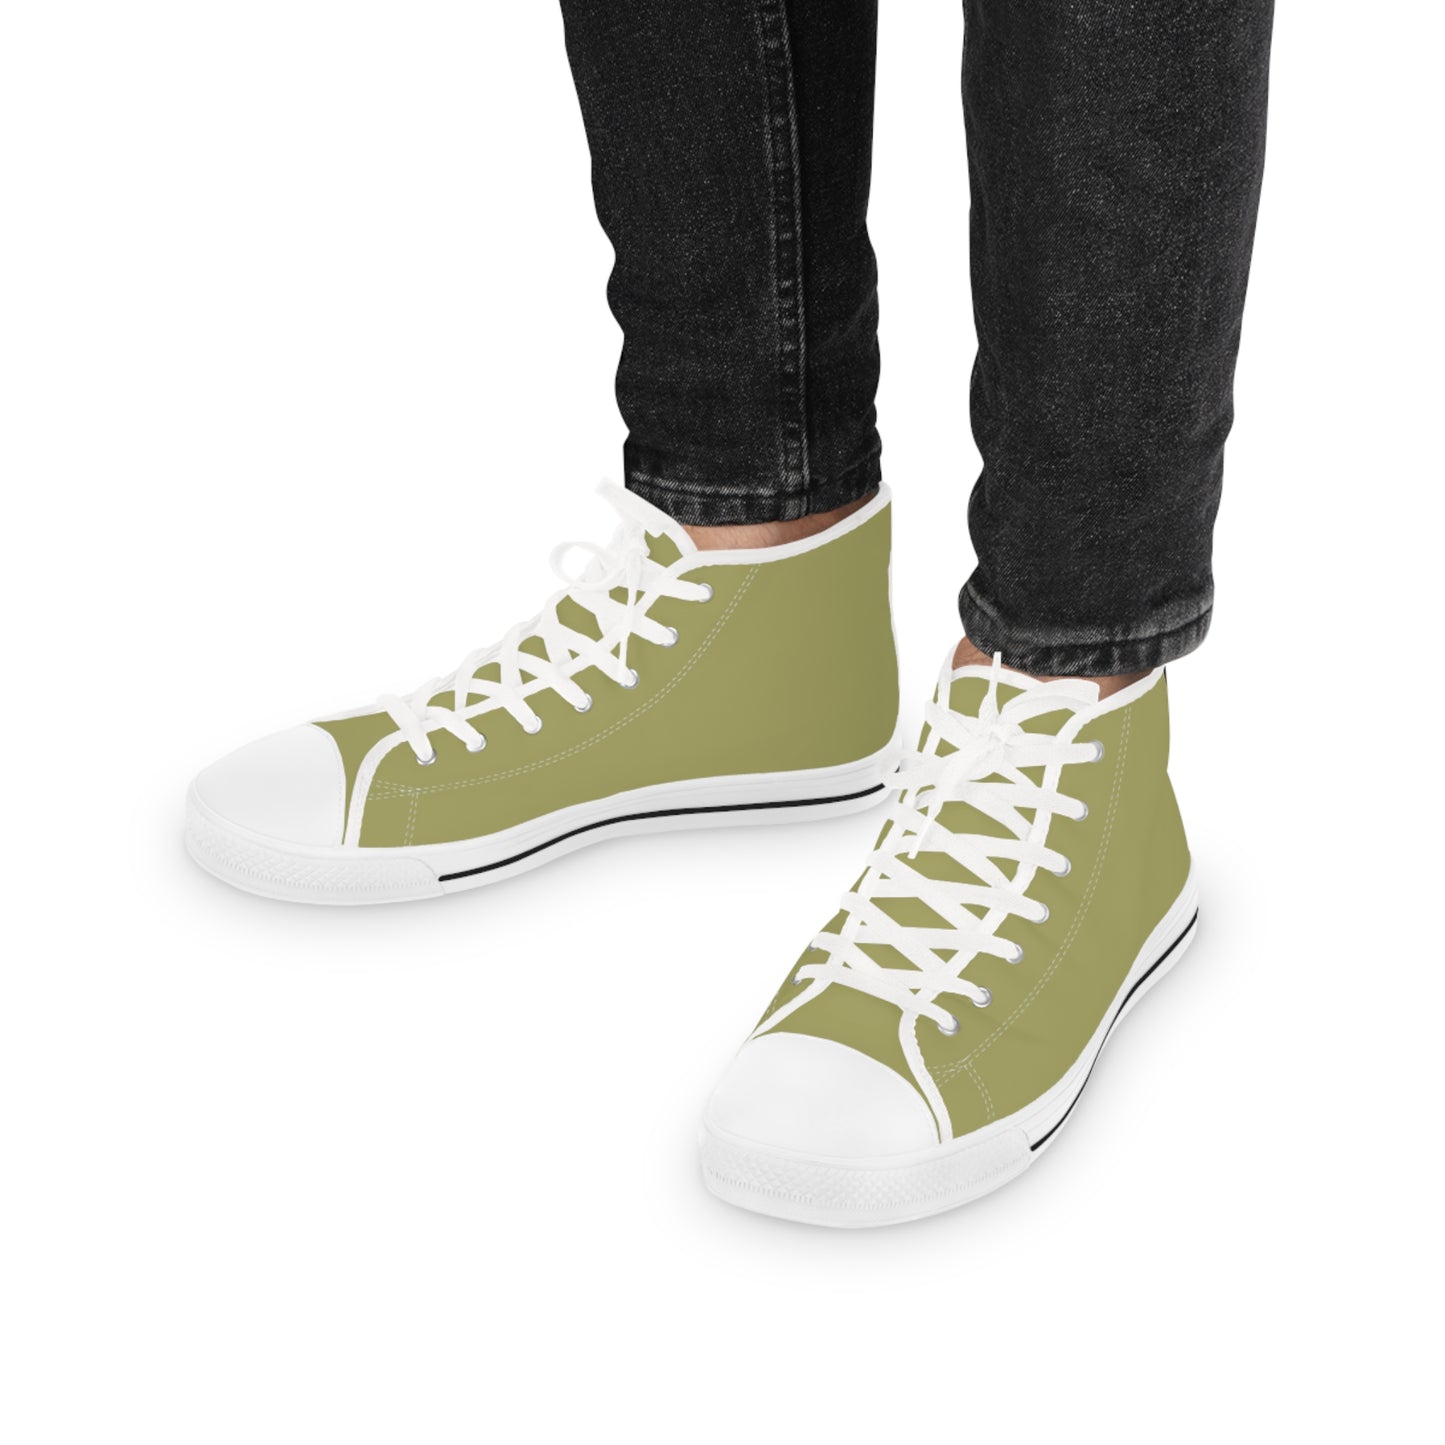 Men's Canvas High Top Solid Color Sneakers - Light Moss US 14 White sole